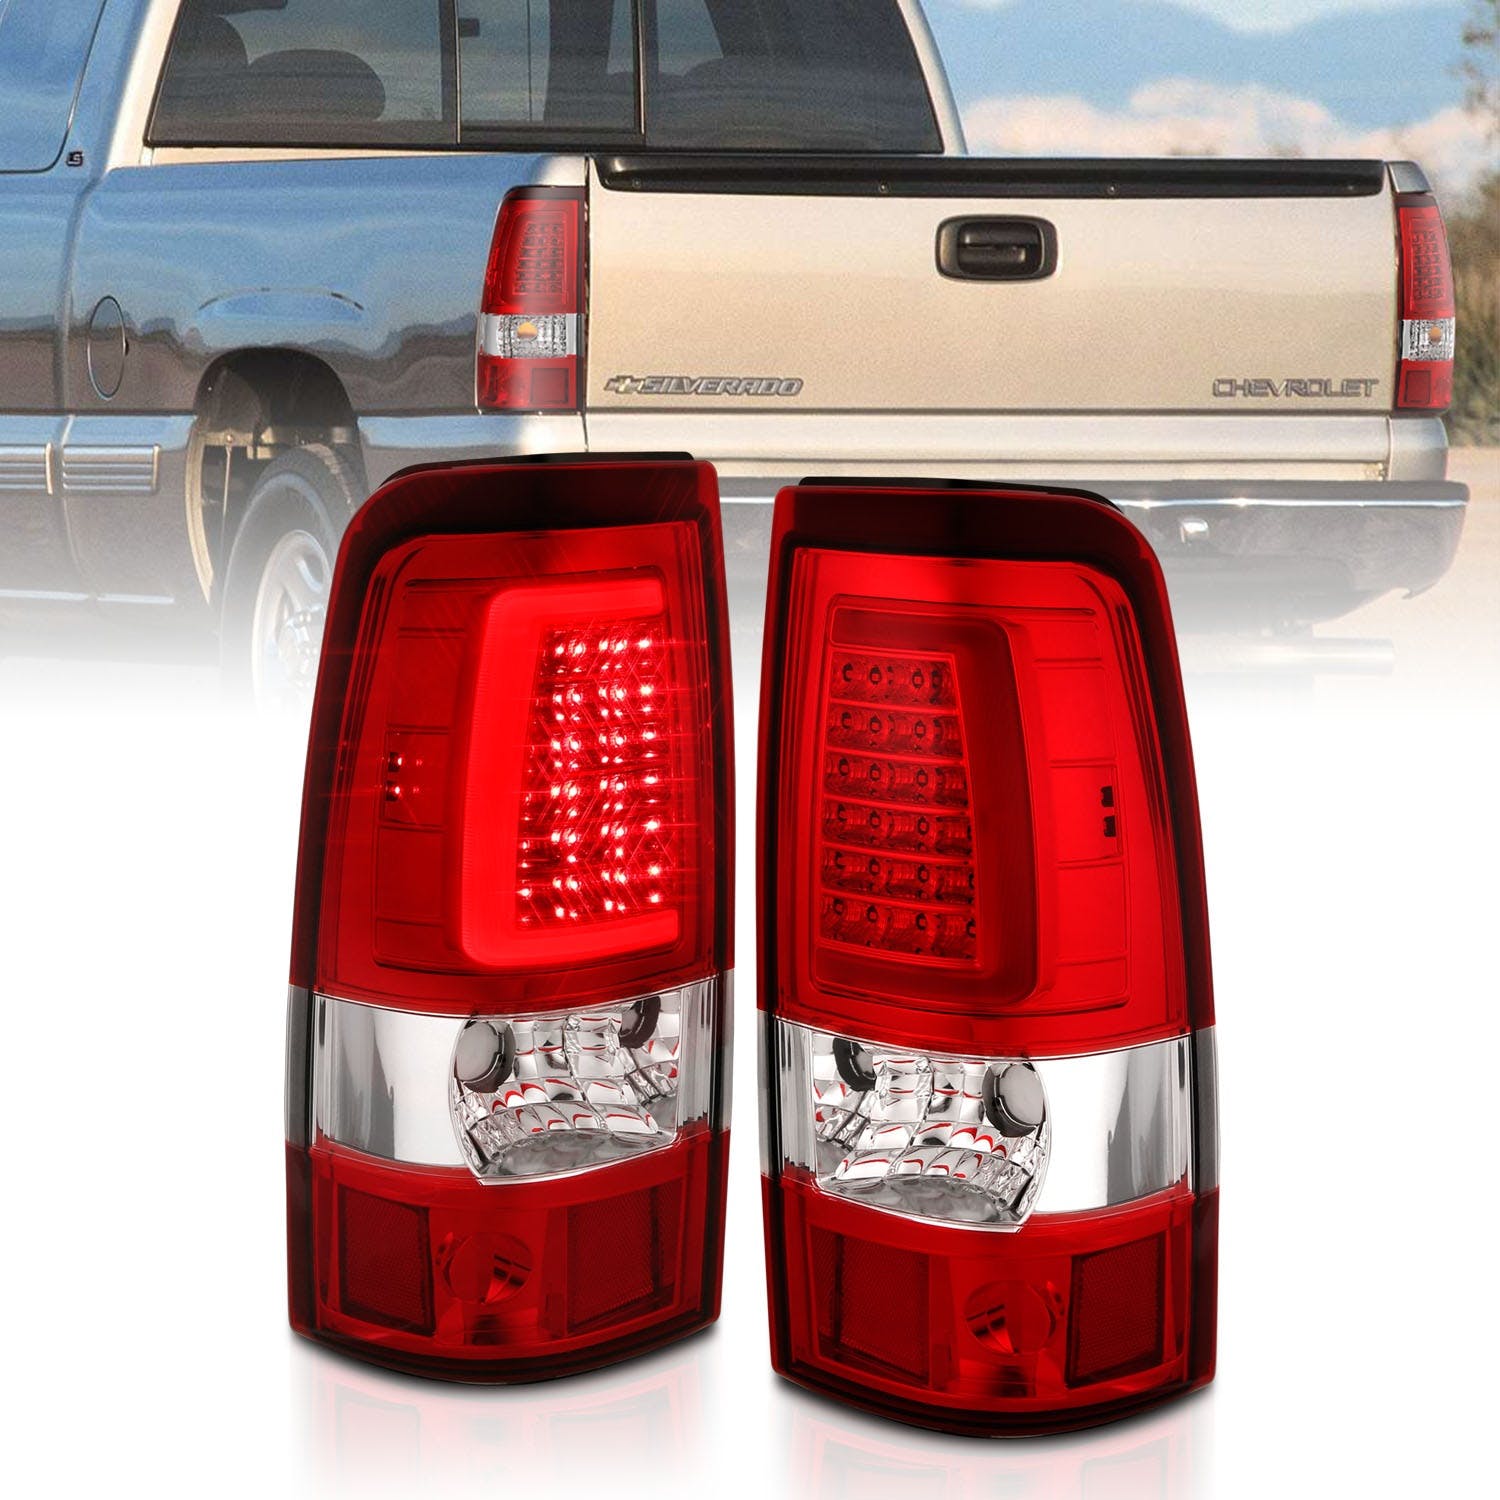 AnzoUSA 311332 LED Taillights Plank Style Chrome with Red/Clear Lens